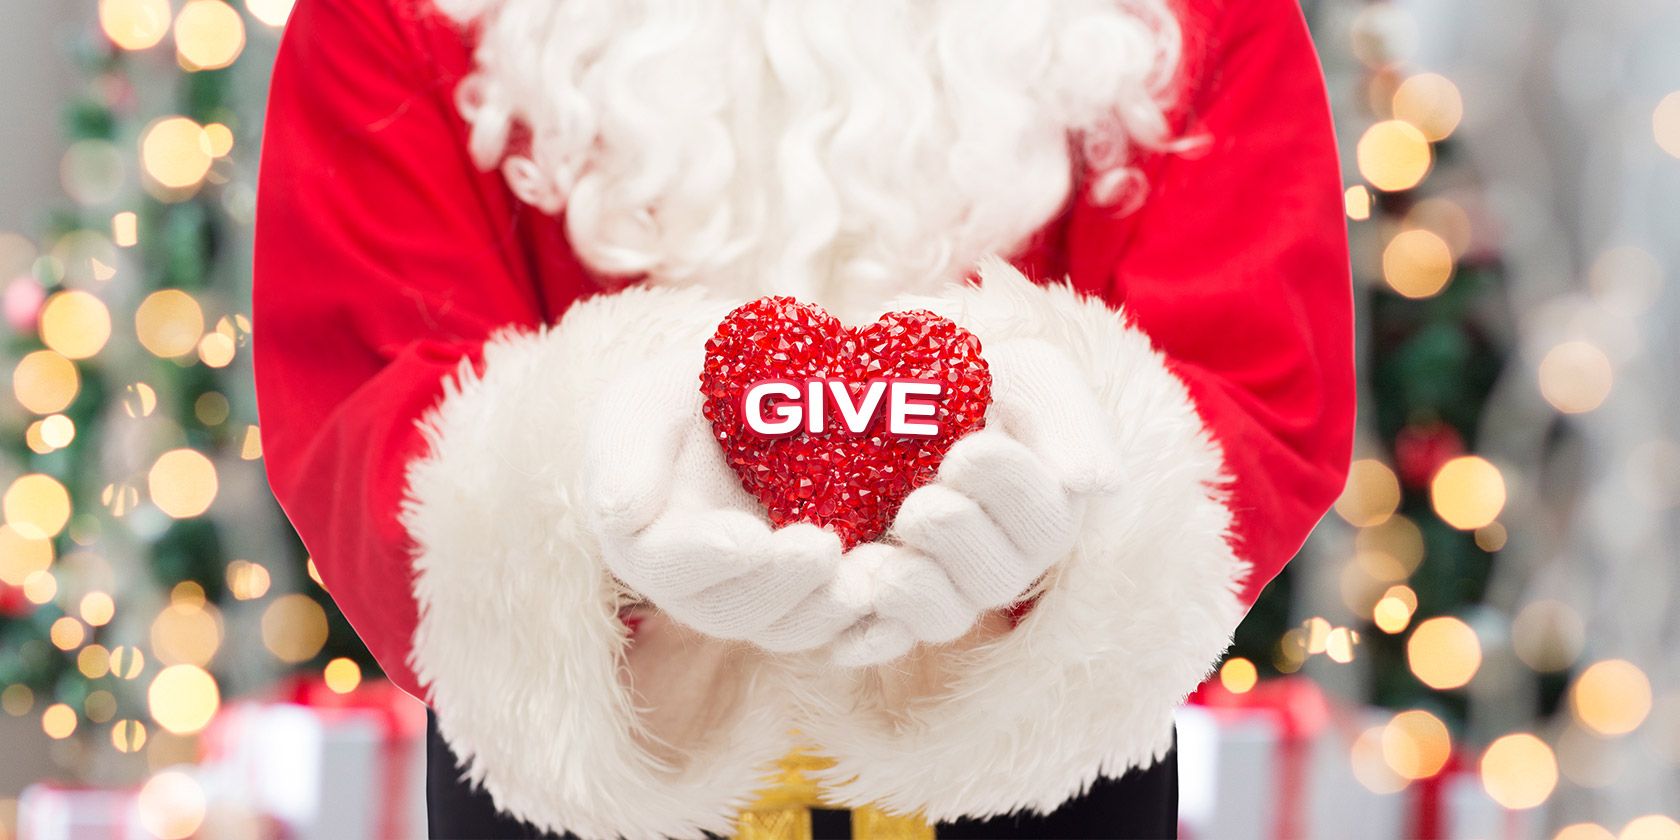 help with christmas 2020 near me Top 7 Christmas Charity Organizations That Help Low Income Families help with christmas 2020 near me